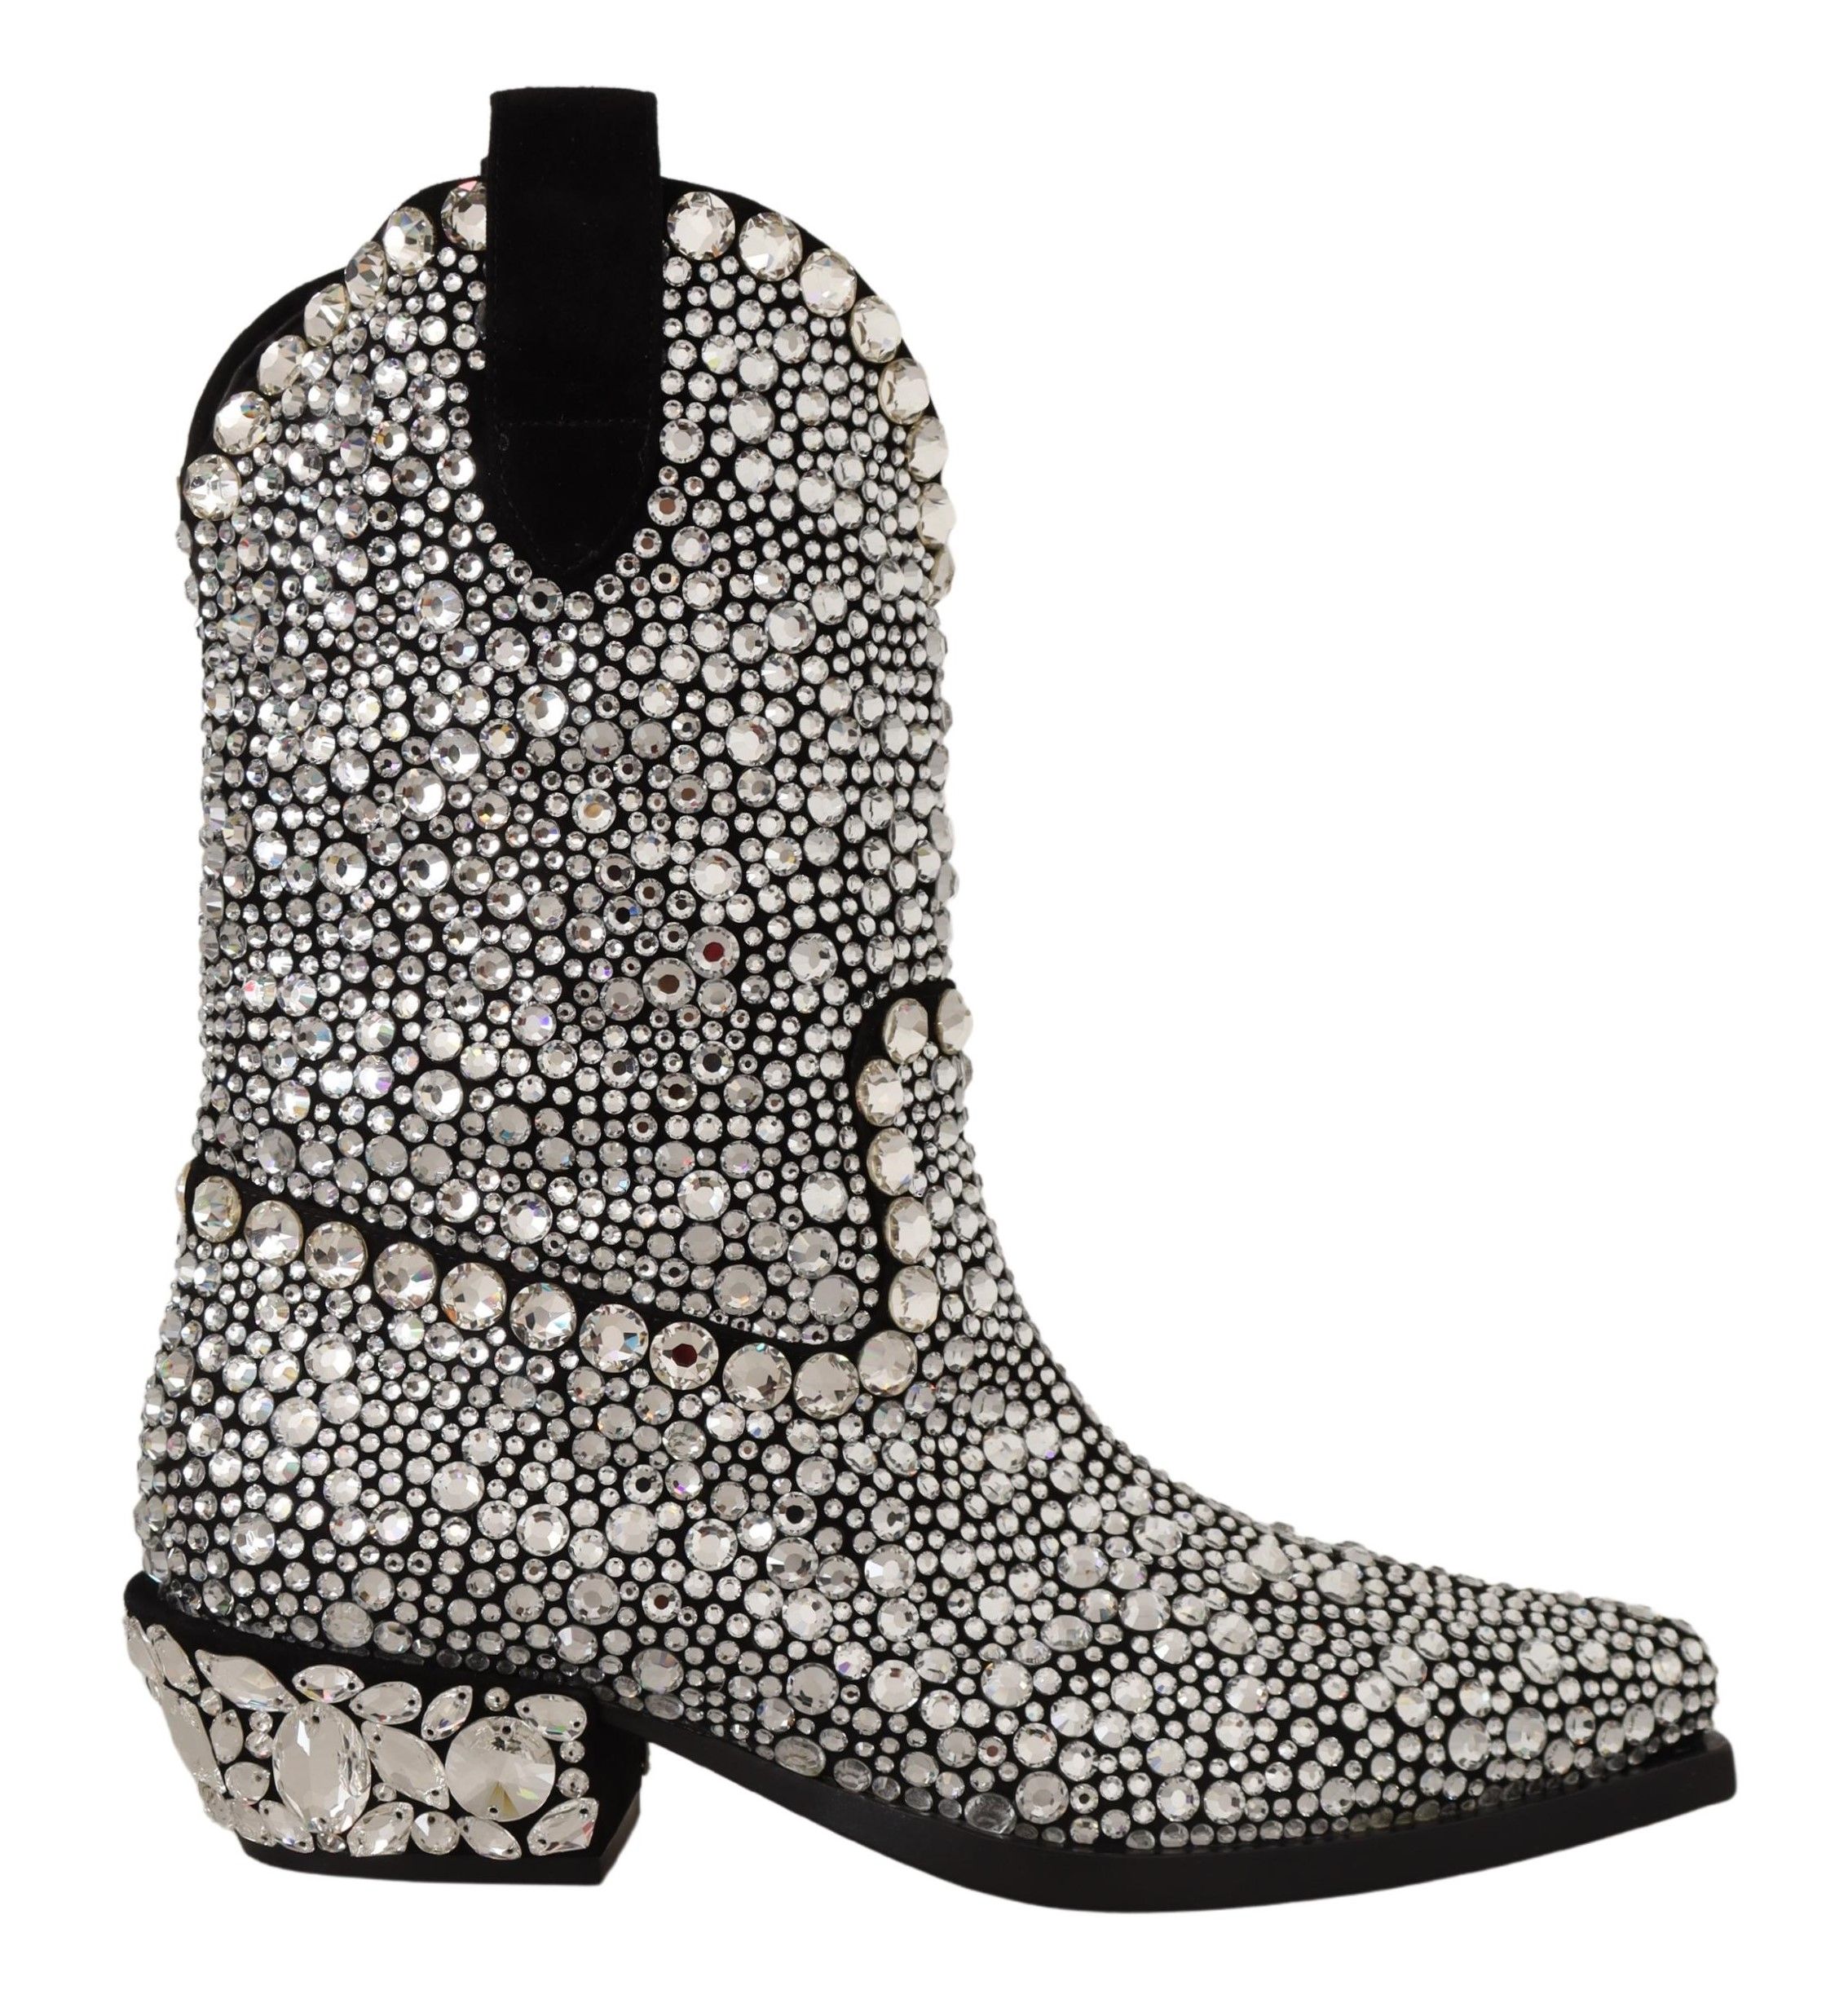 Black Dolce & Gabbana Black Suede Strass Crystal Cowgirl Boots EU35/US4.5